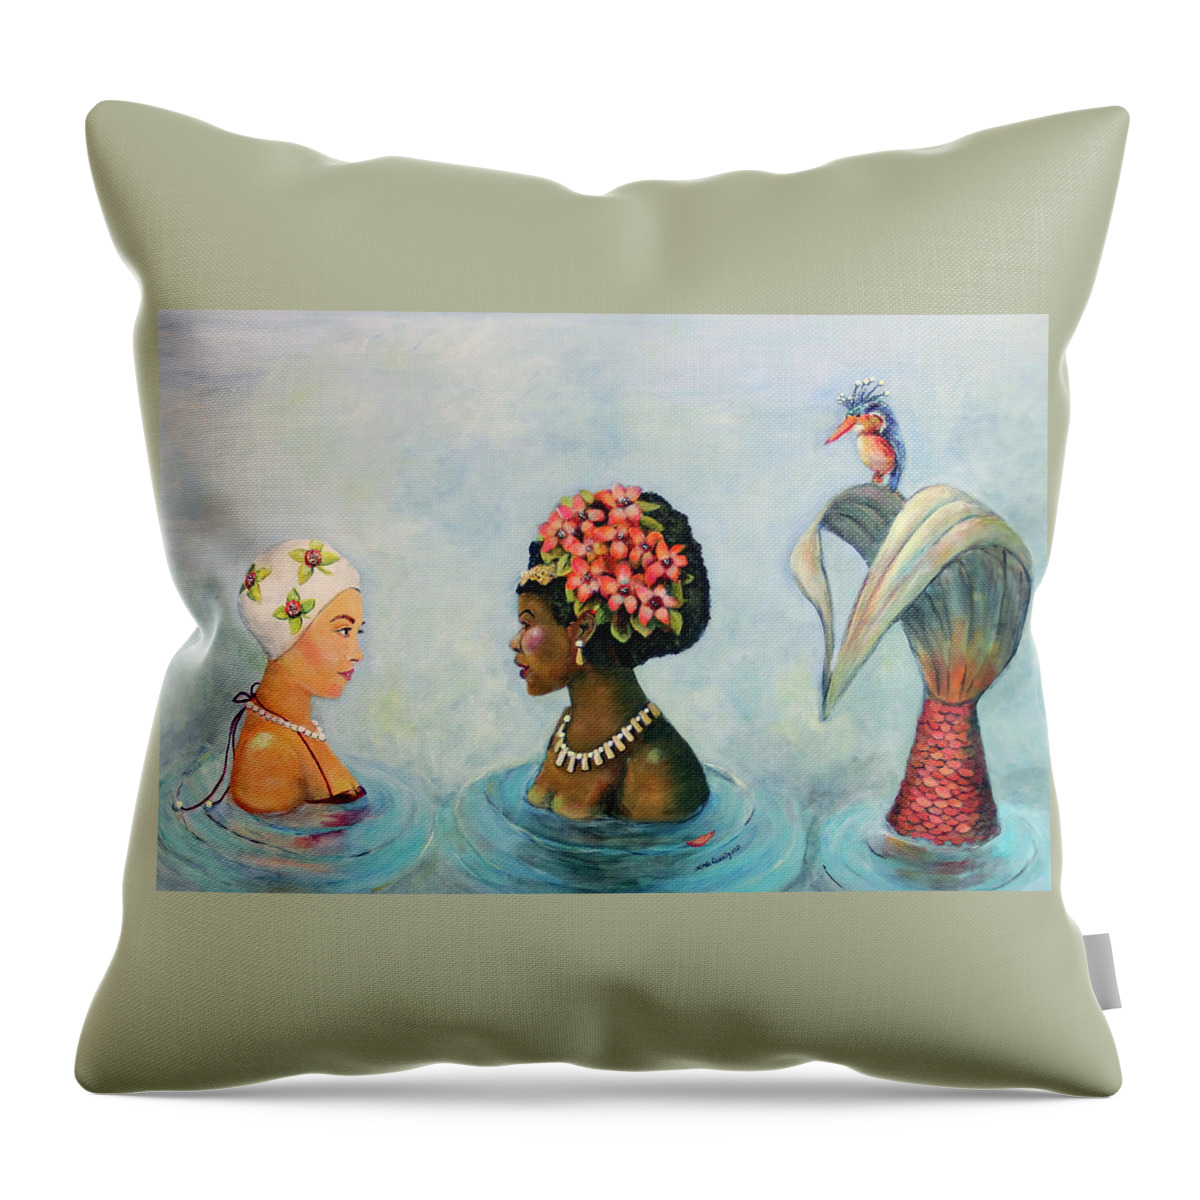 Mermaid Throw Pillow featuring the painting Conversation With a Mermaid by Linda Queally by Linda Queally